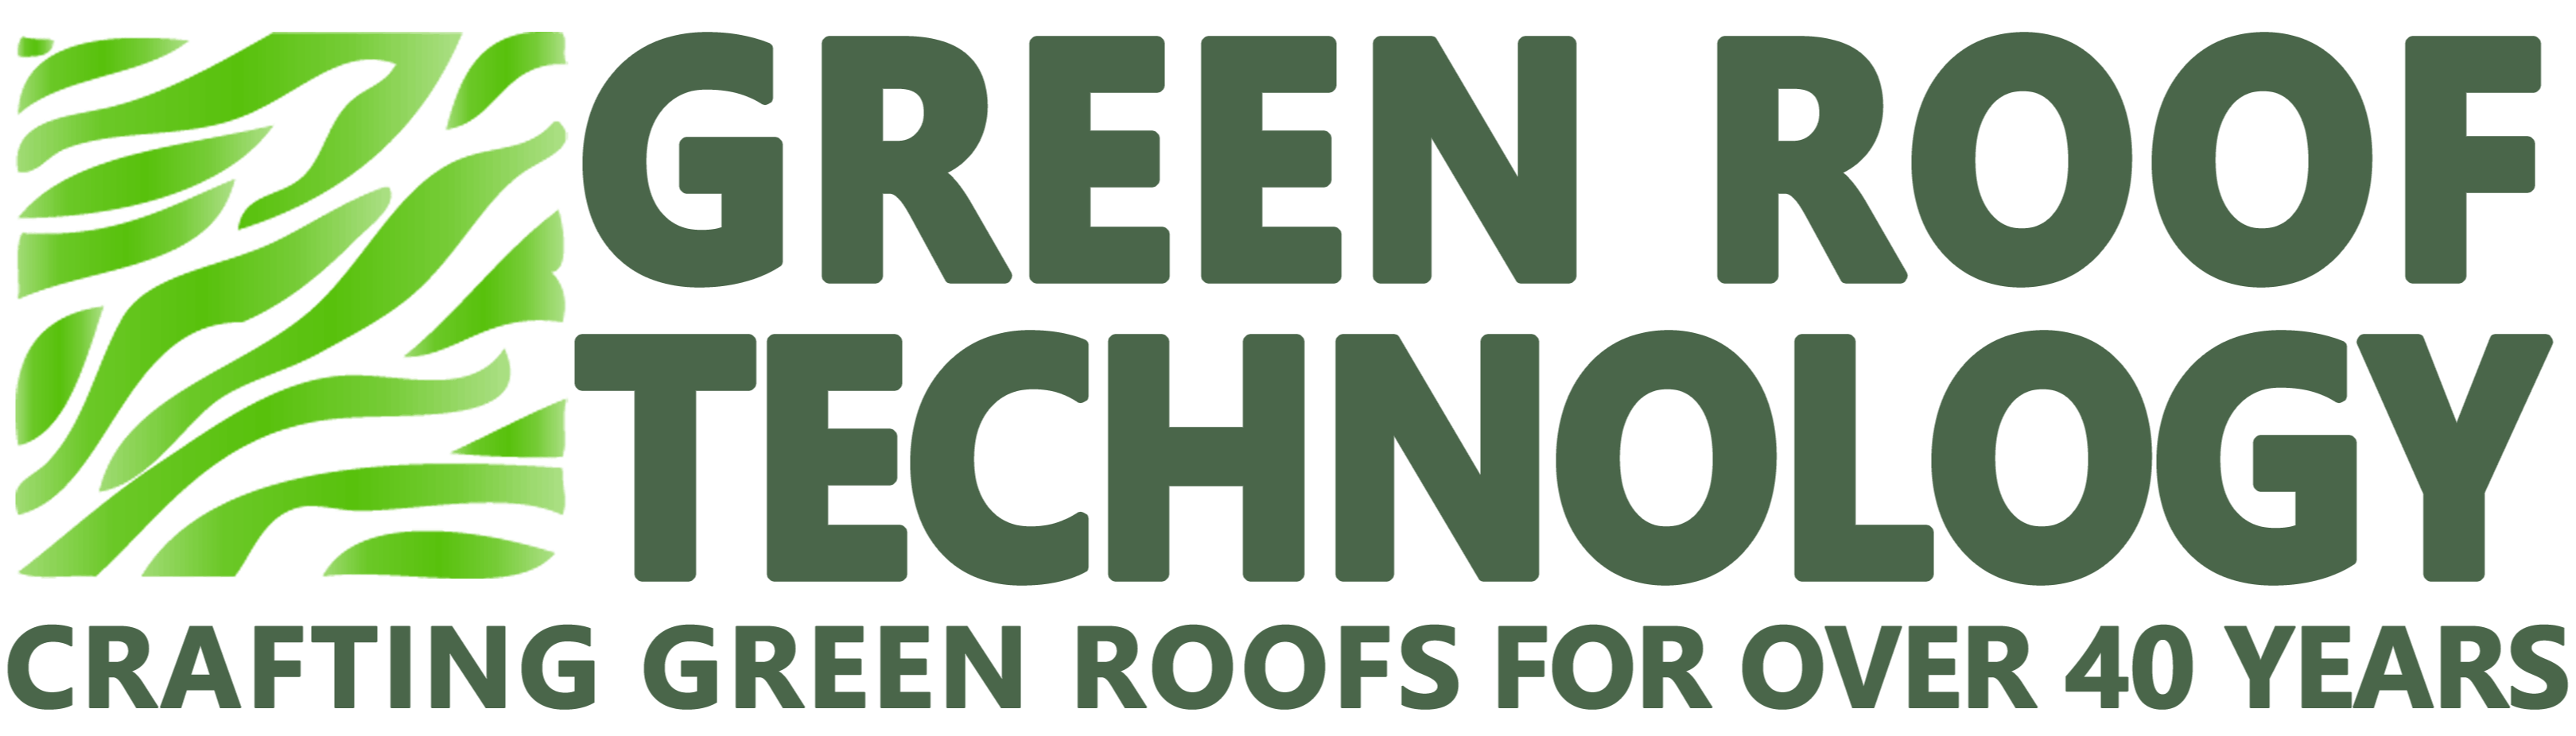 Consultancy, Design, Engineering, Project Management and Expert Witness of Green Roofs and Green Walls since 1980